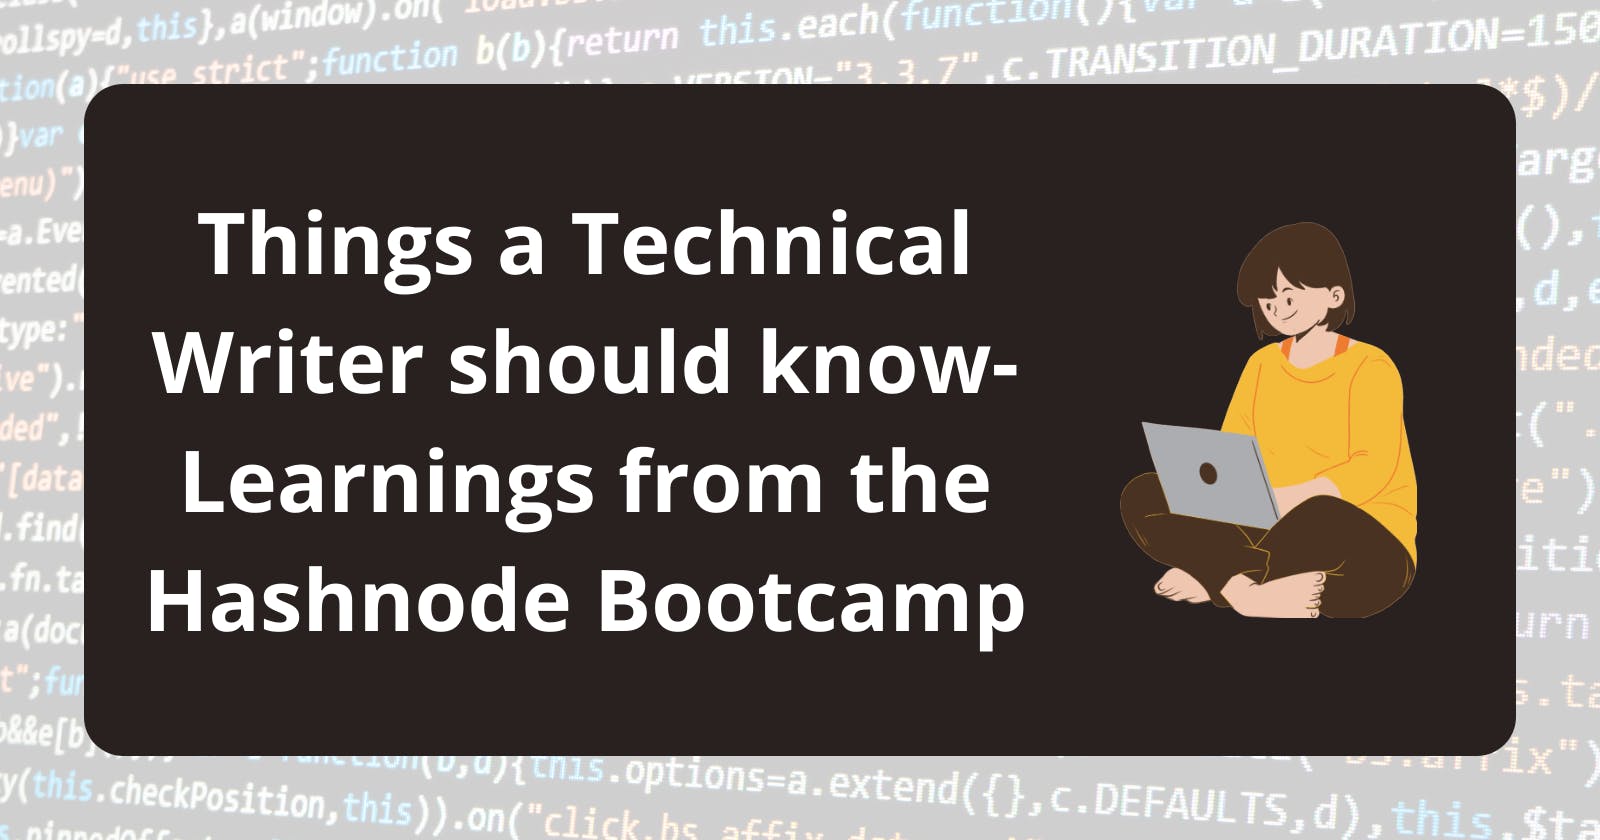 Things a Technical Writer should know-Learnings from the Hashnode Bootcamp